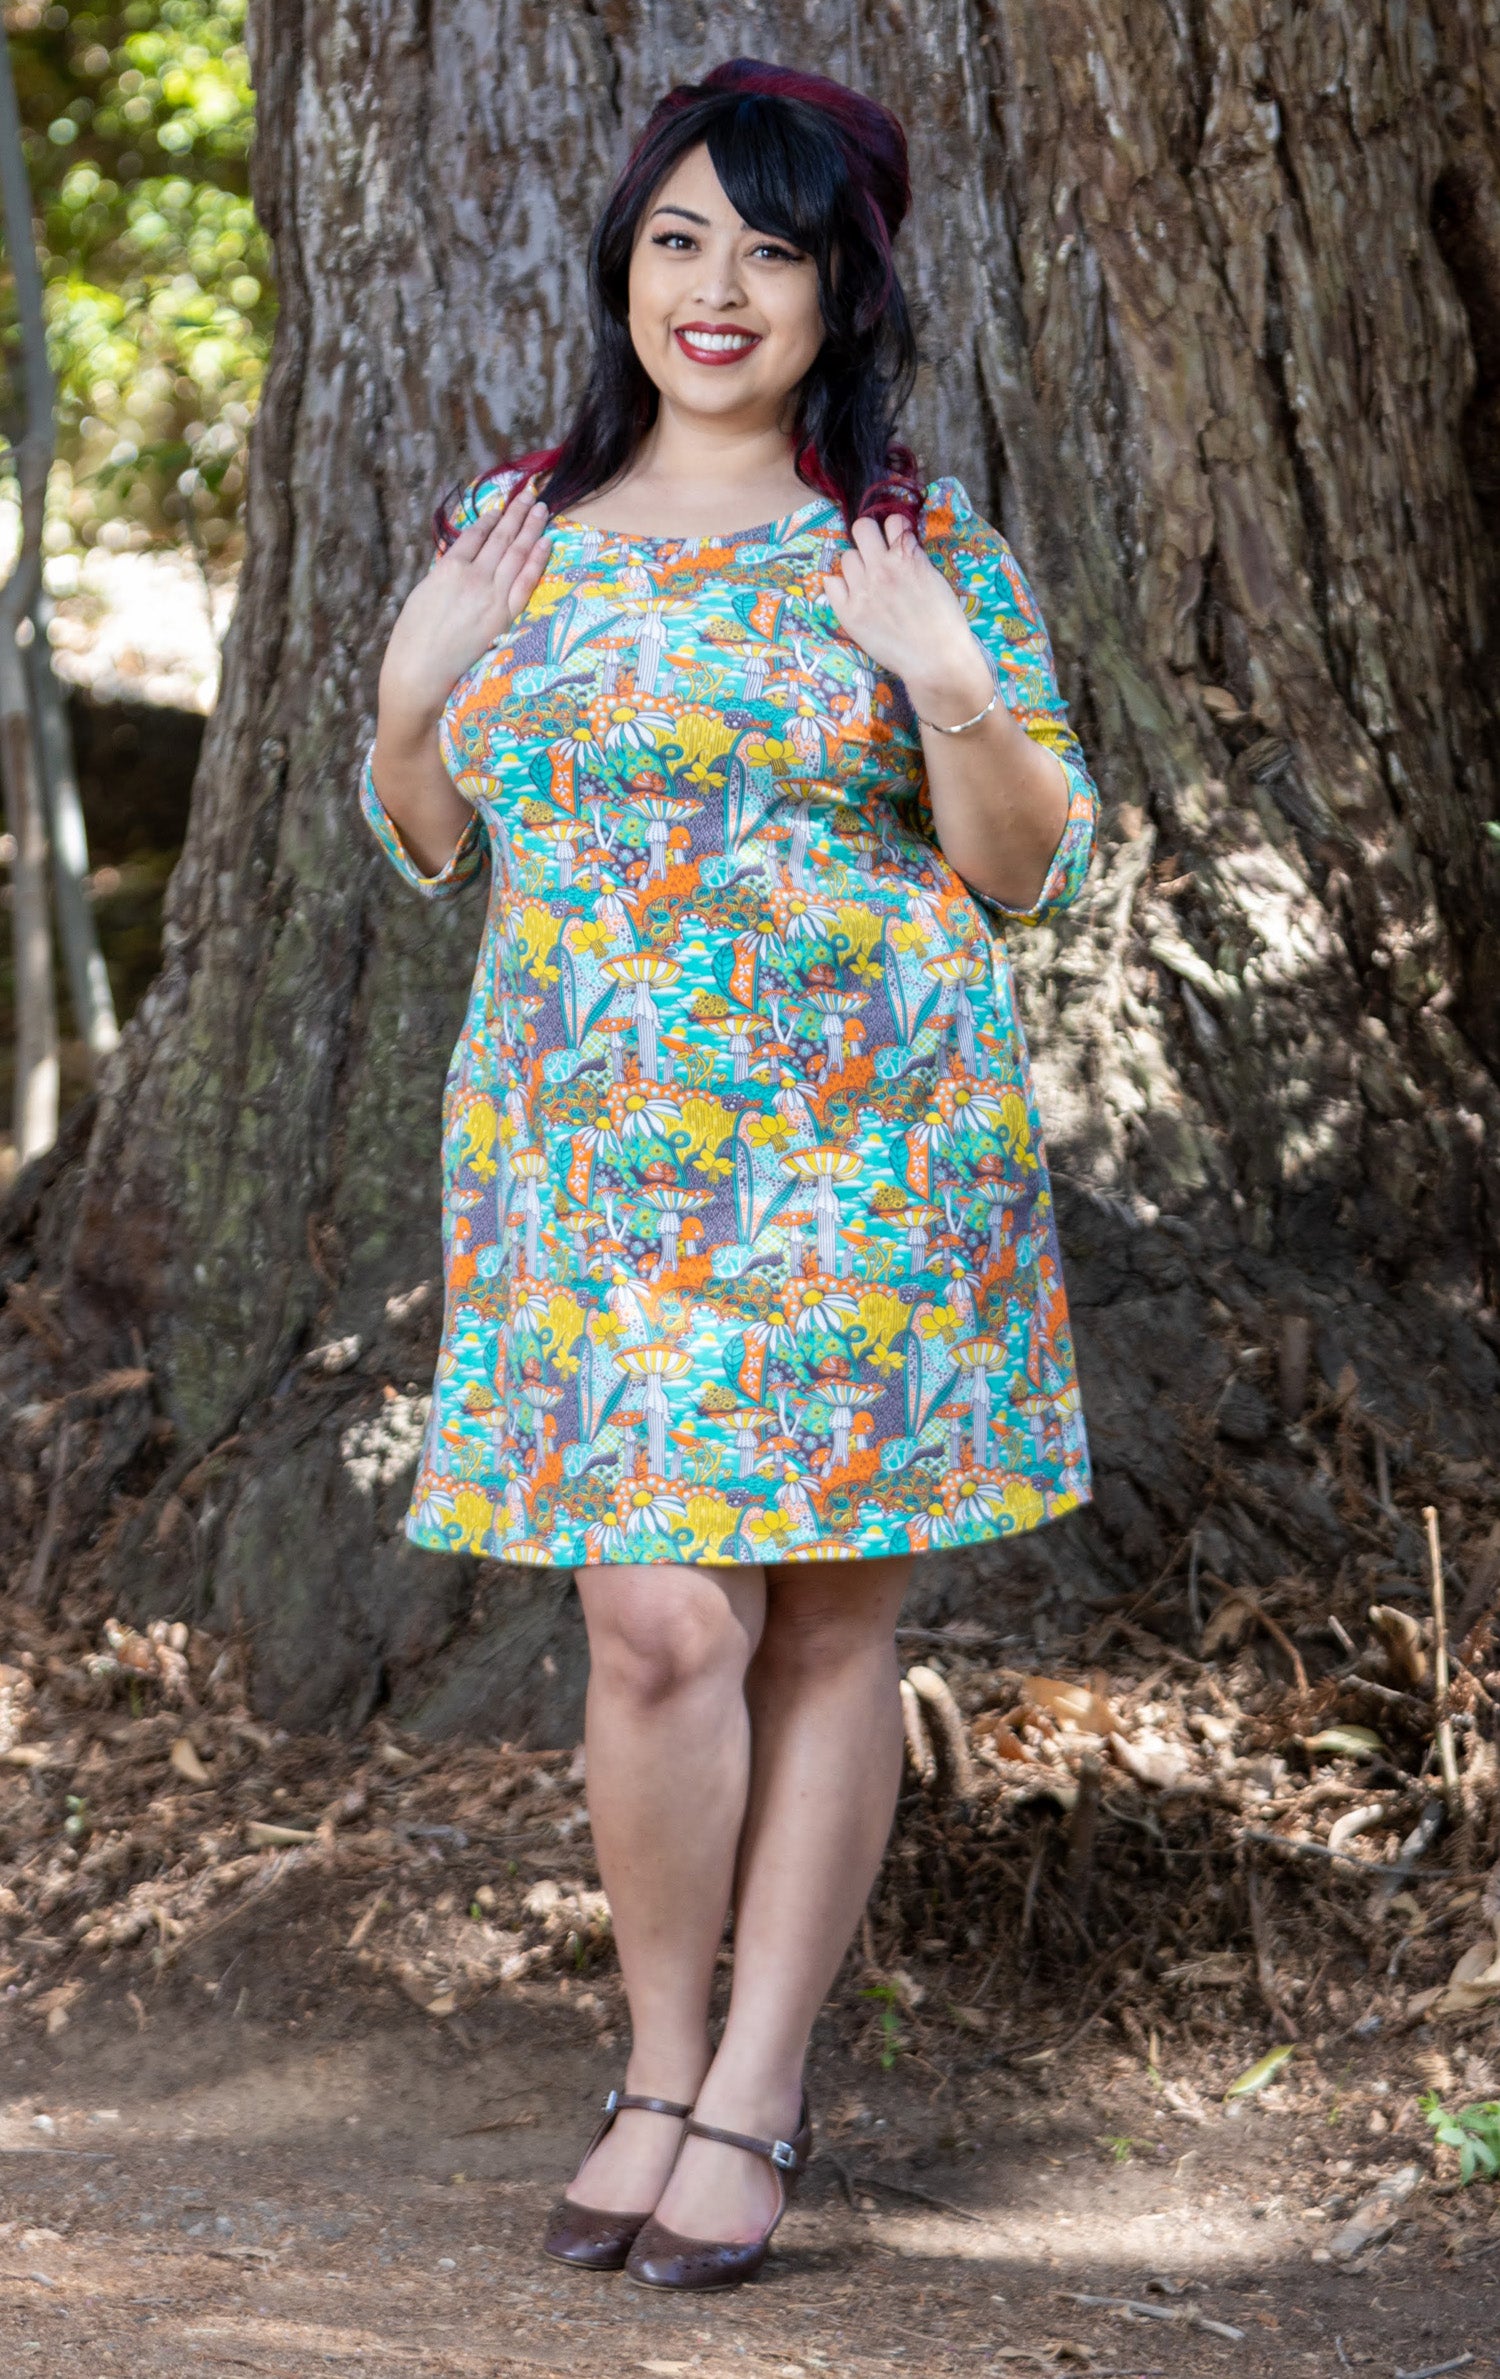 Model wearing teal, orange and yellow pocket tunic with mushrooms, flowers and snails